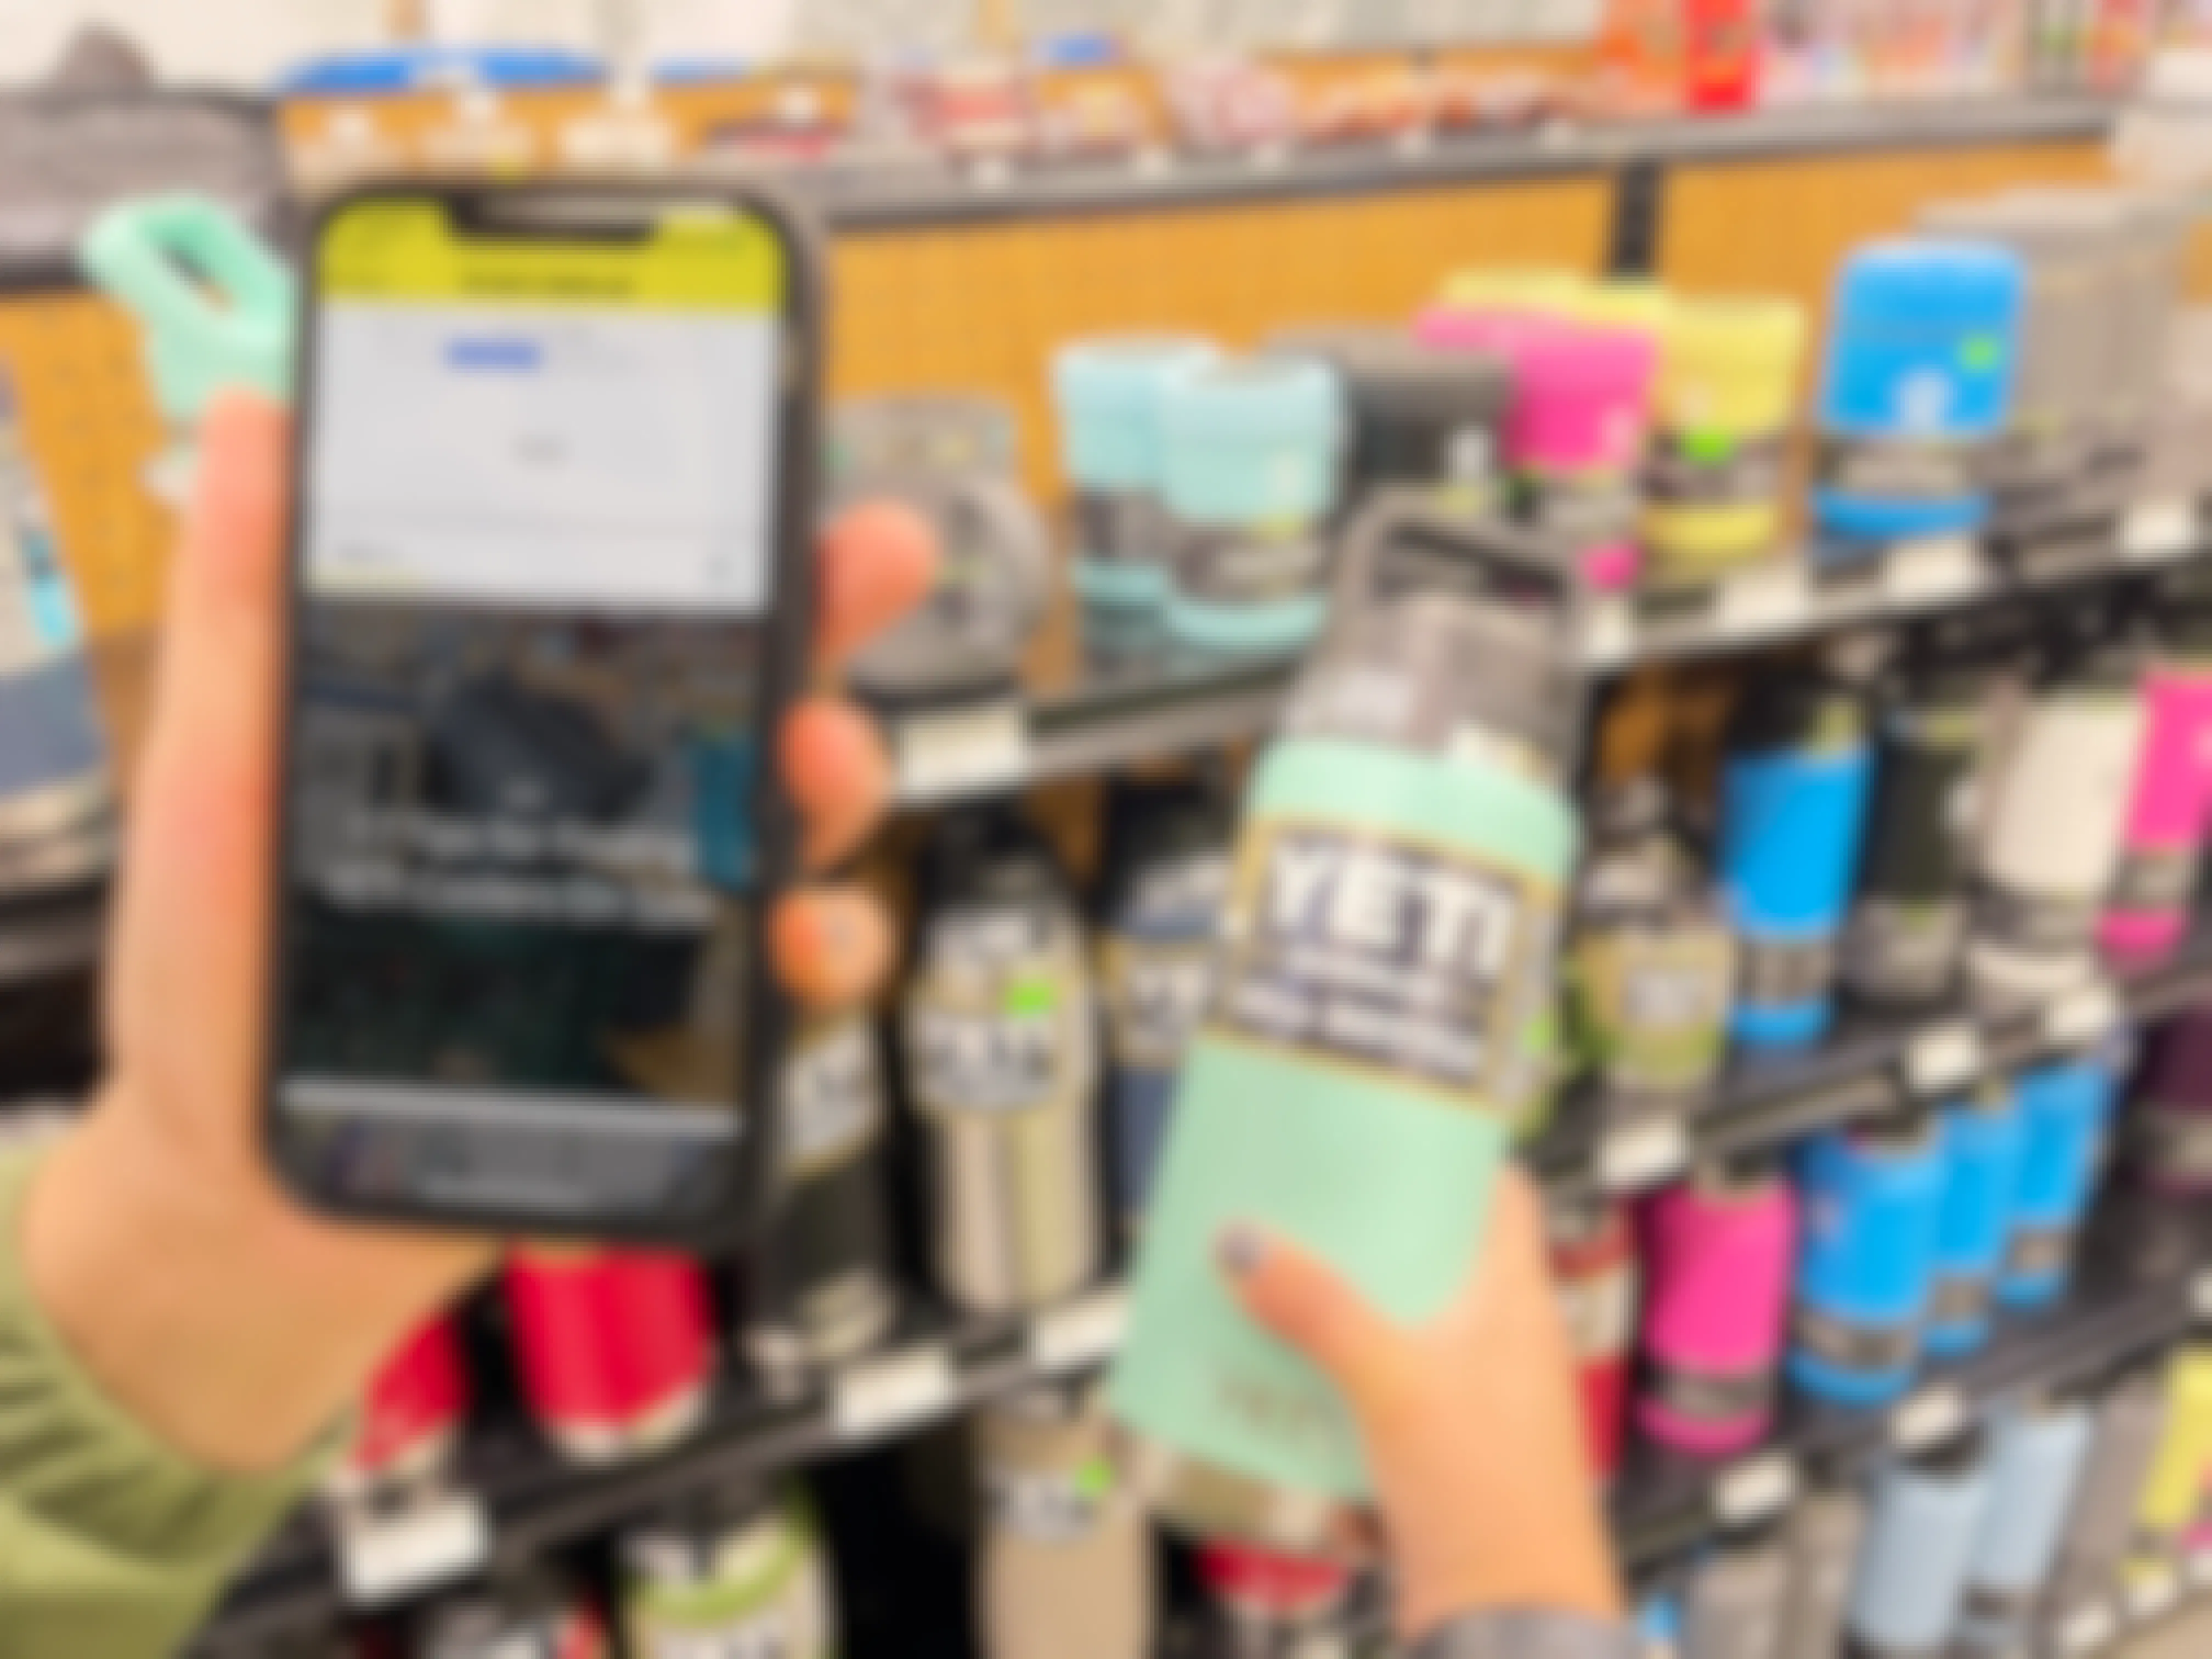 A person's hand holding up their cell phone with the KCL app open to Yeti tips and their other hand holding a Yeti Rambler water bottle in front of a shelf of Yeti products.